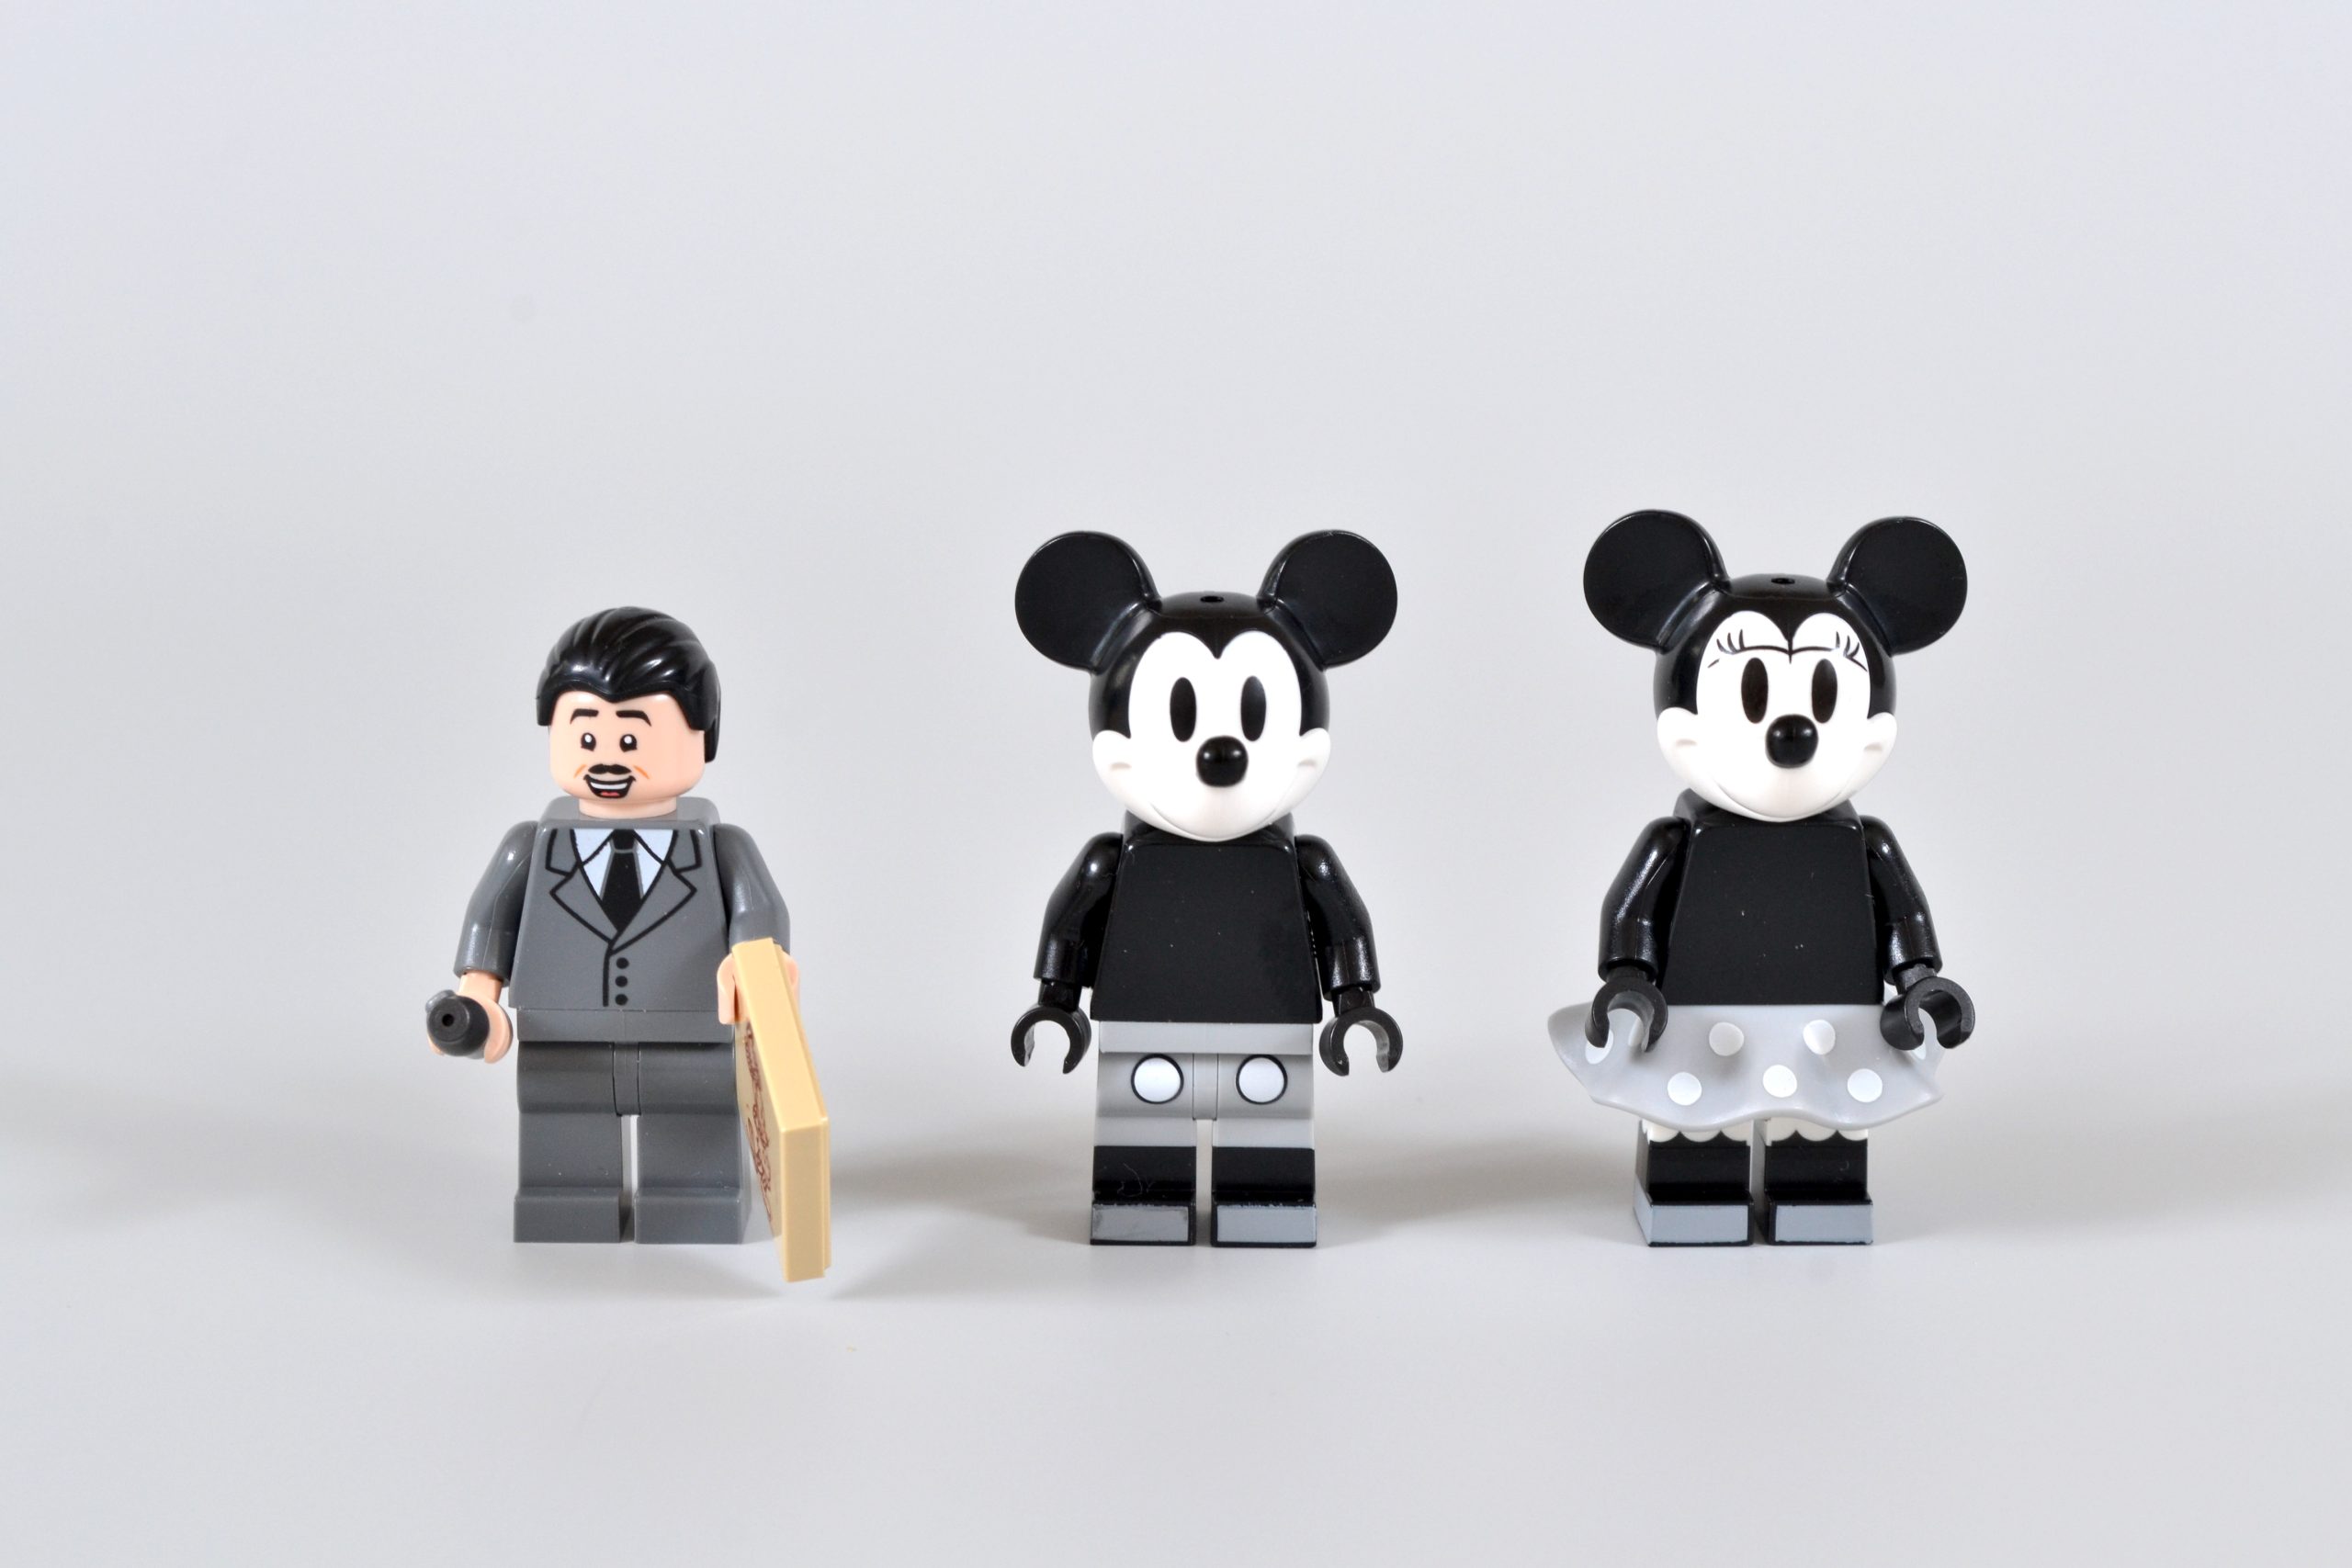 Celebrate 100 Years of Disney Magic with LEGO's Tribute Camera